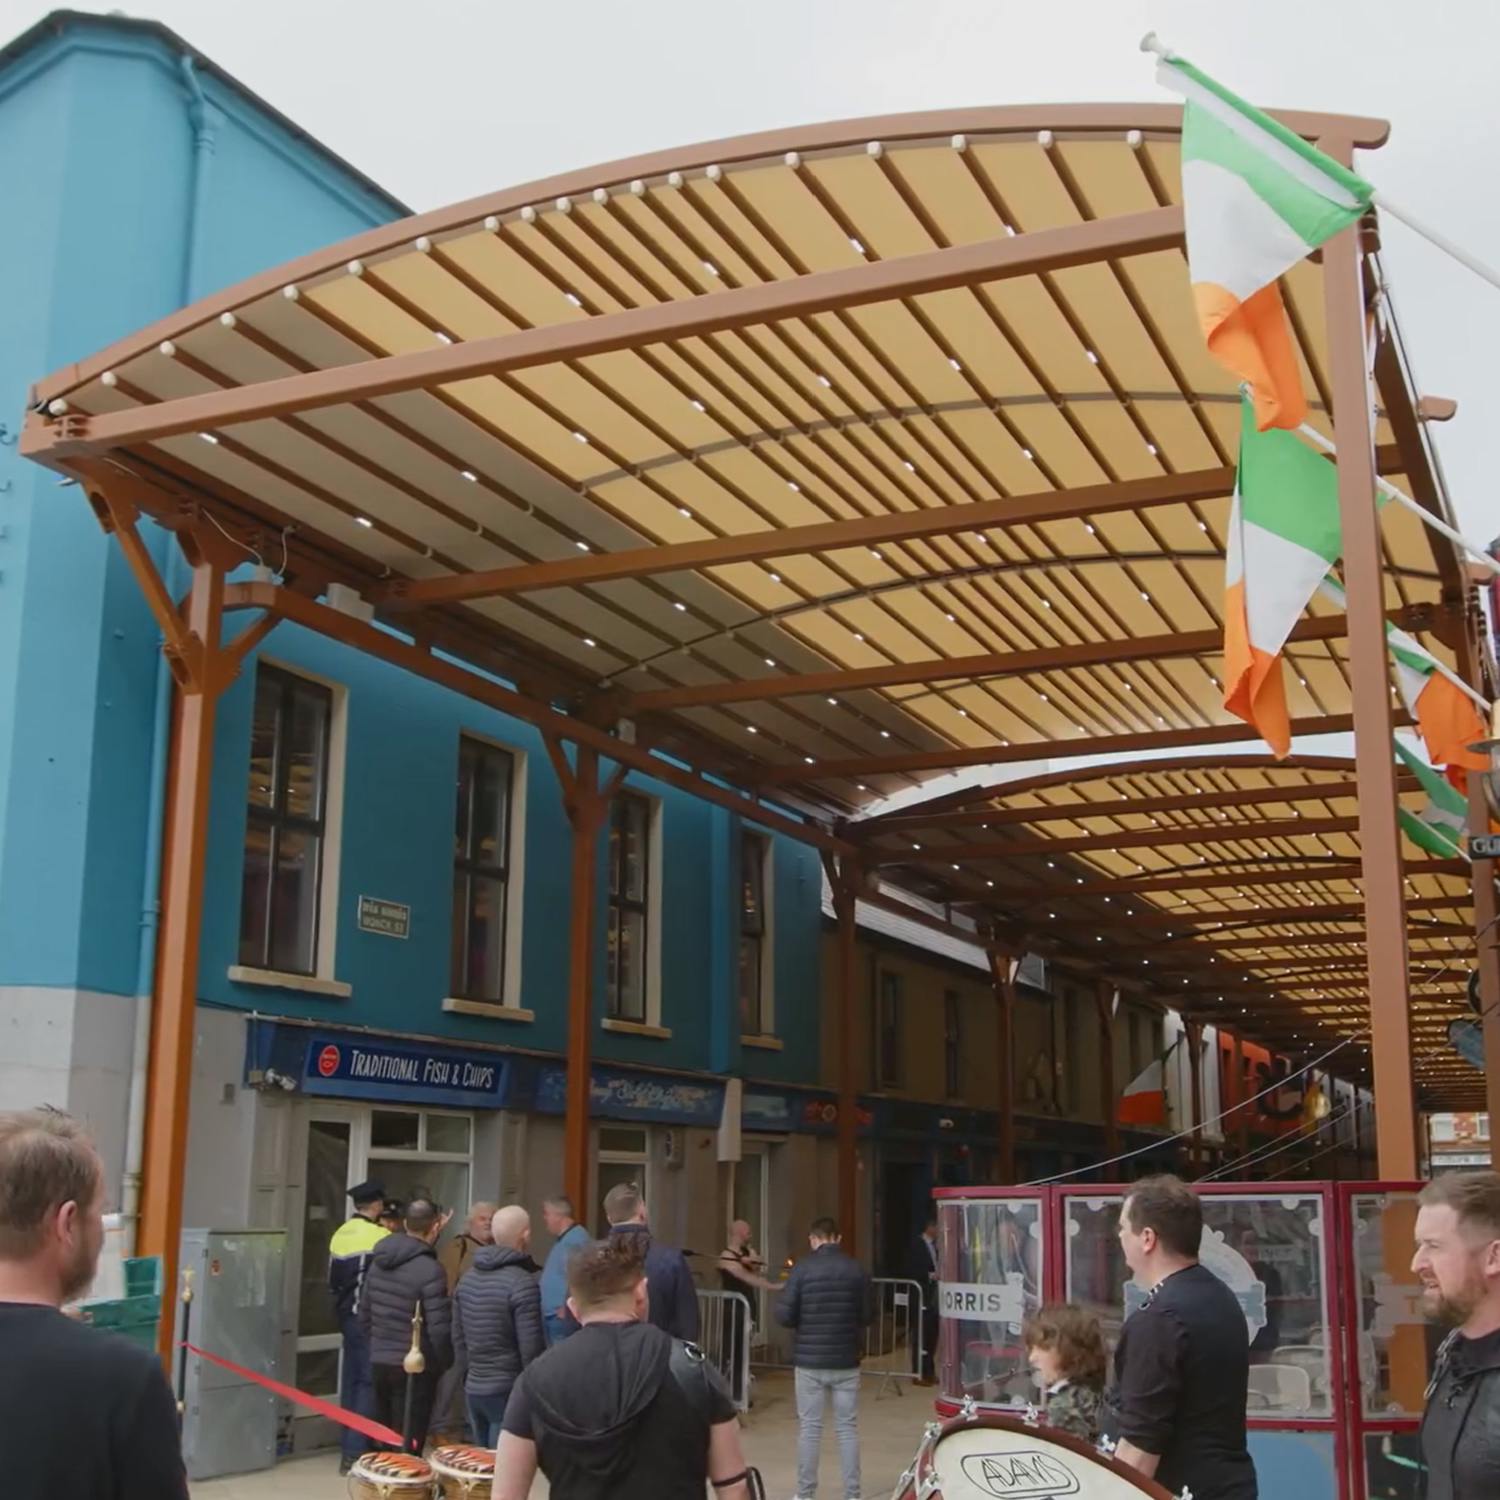 Wexford town builds roof over entire street